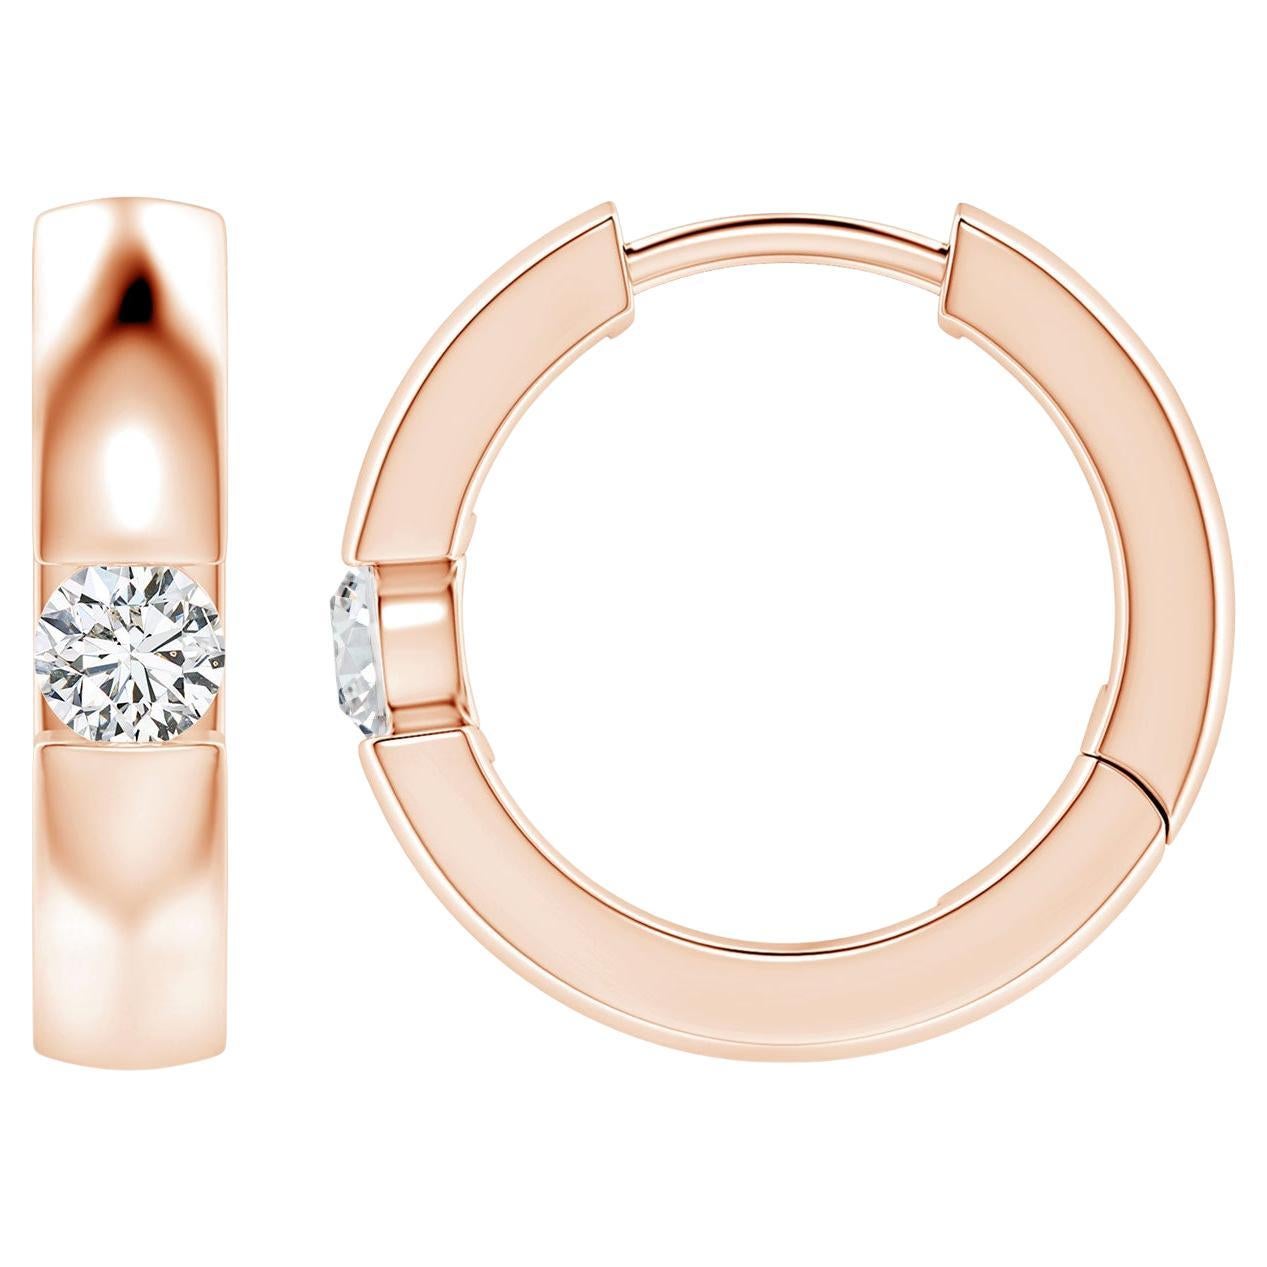 Natural Round Diamond Hoop Earrings in 14K Rose Gold (Size-3mm, Color-H)